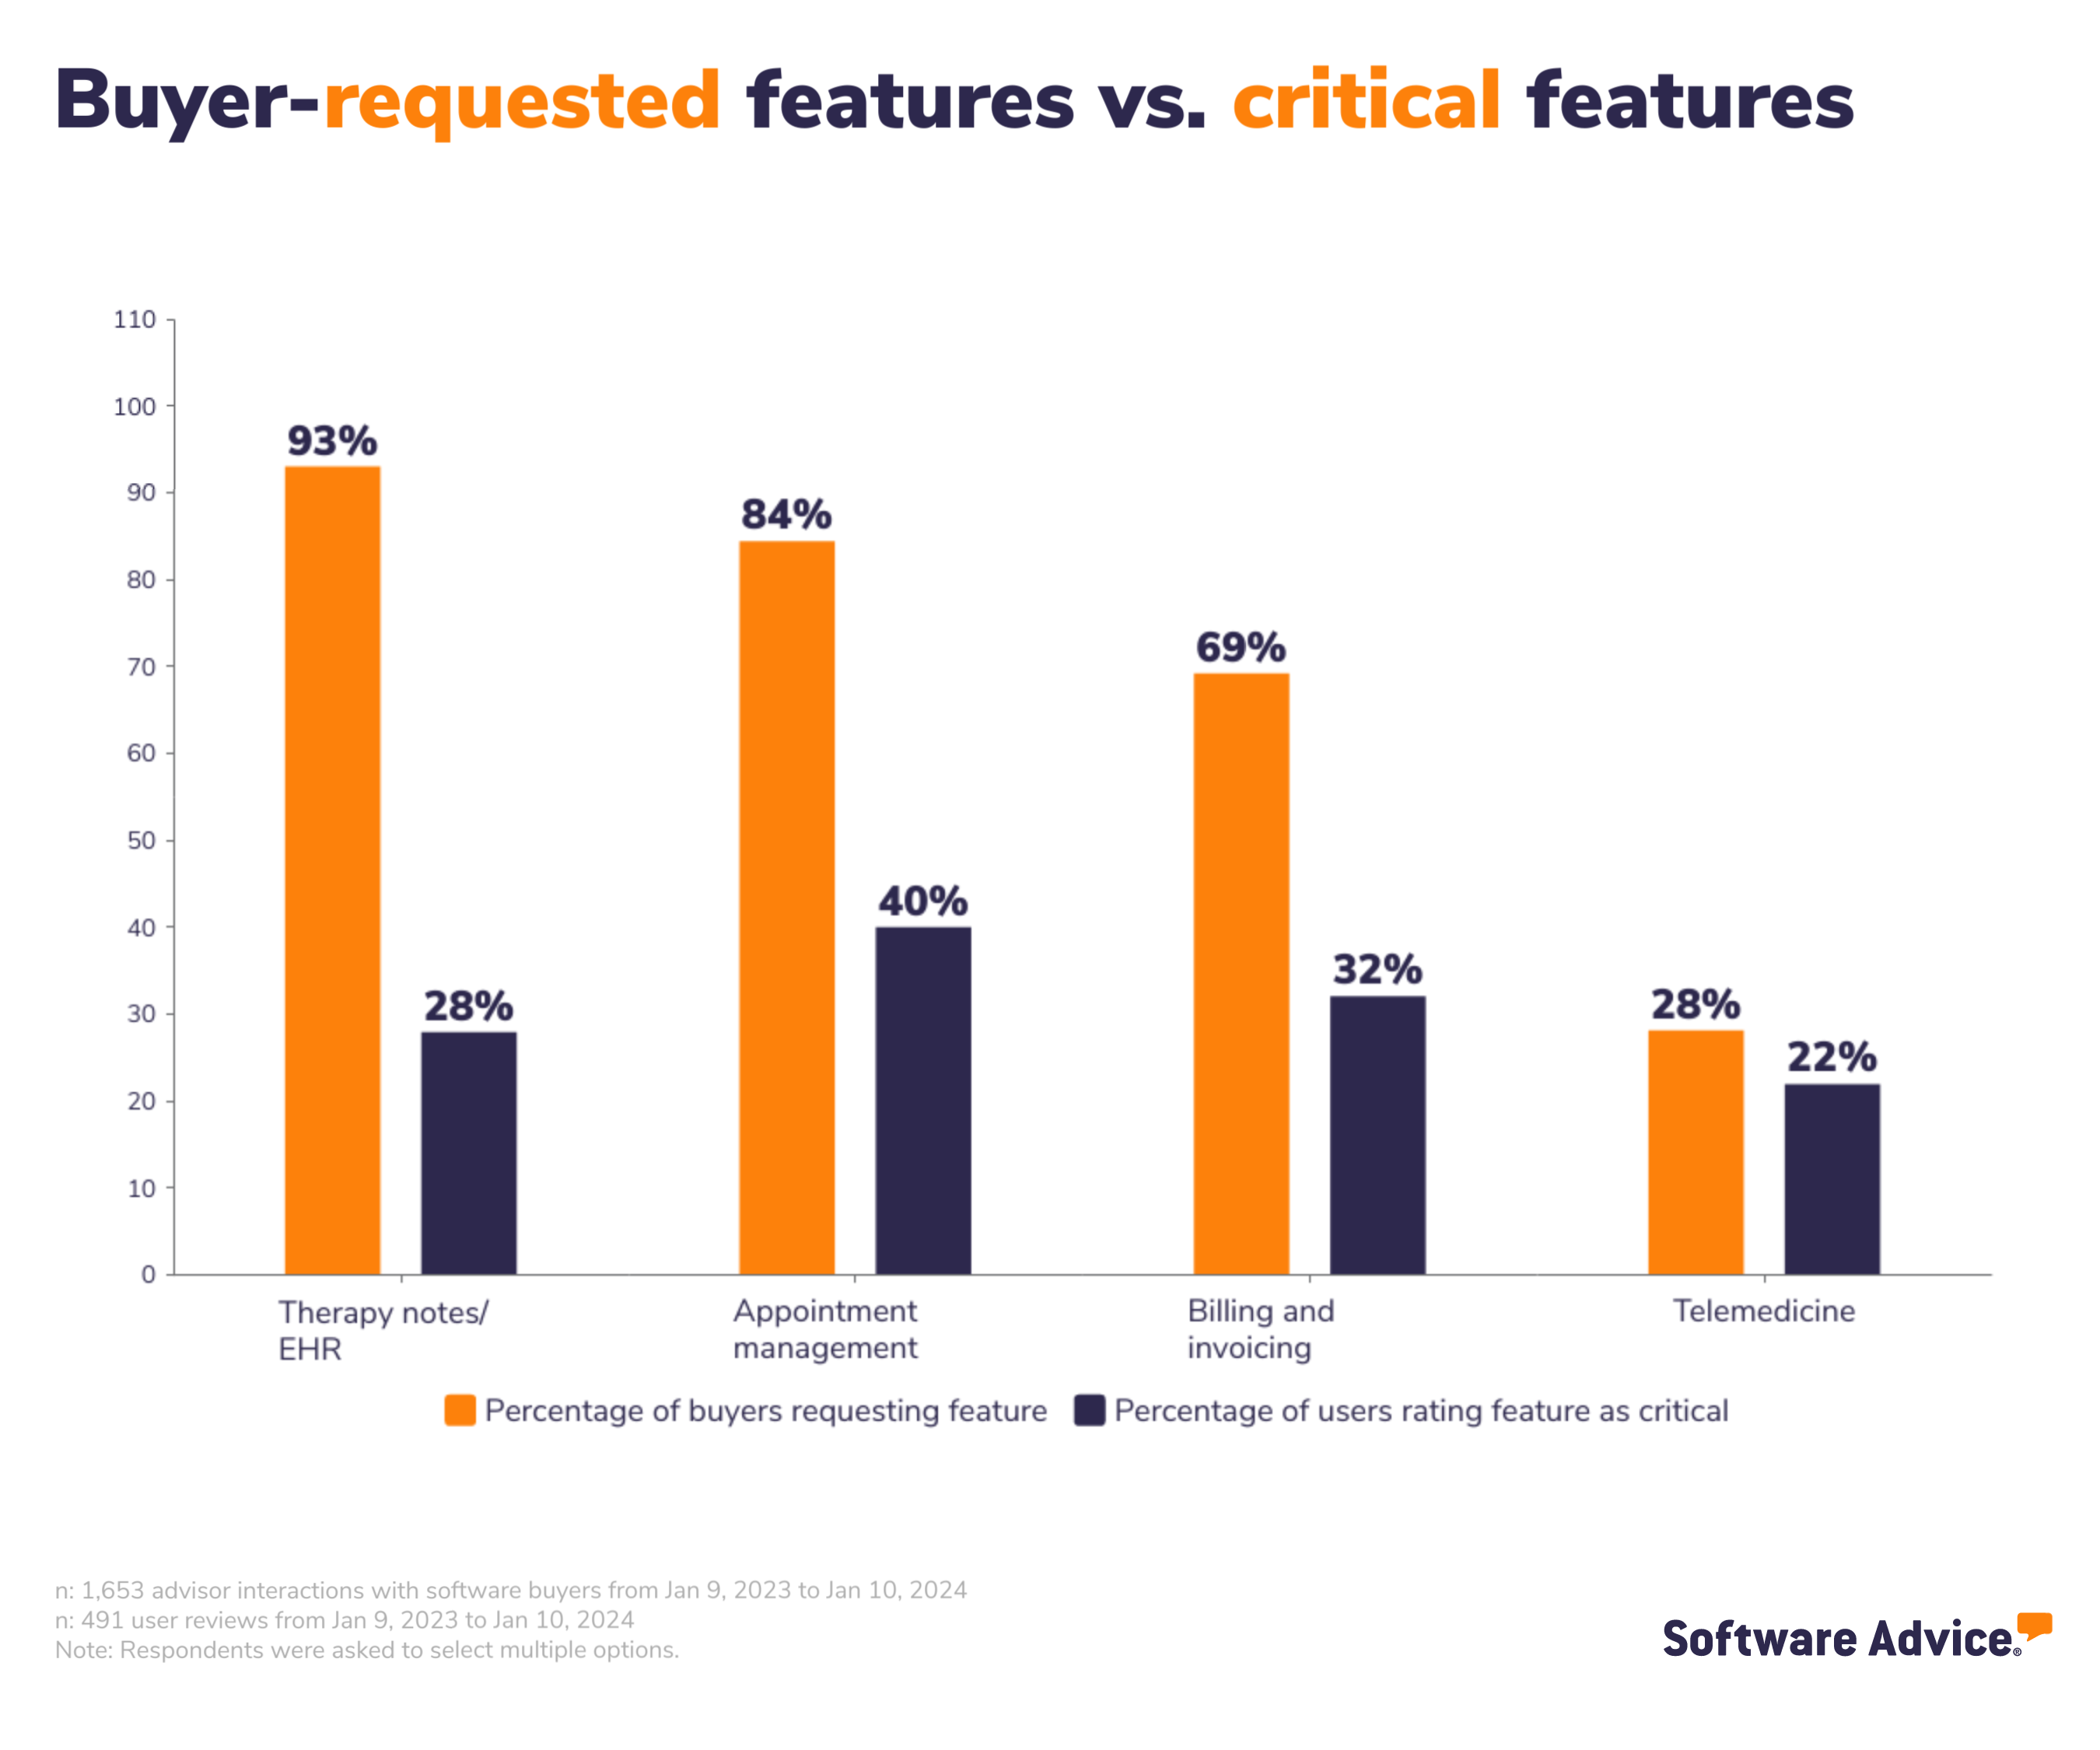 Buyer-requested features vs. critical features